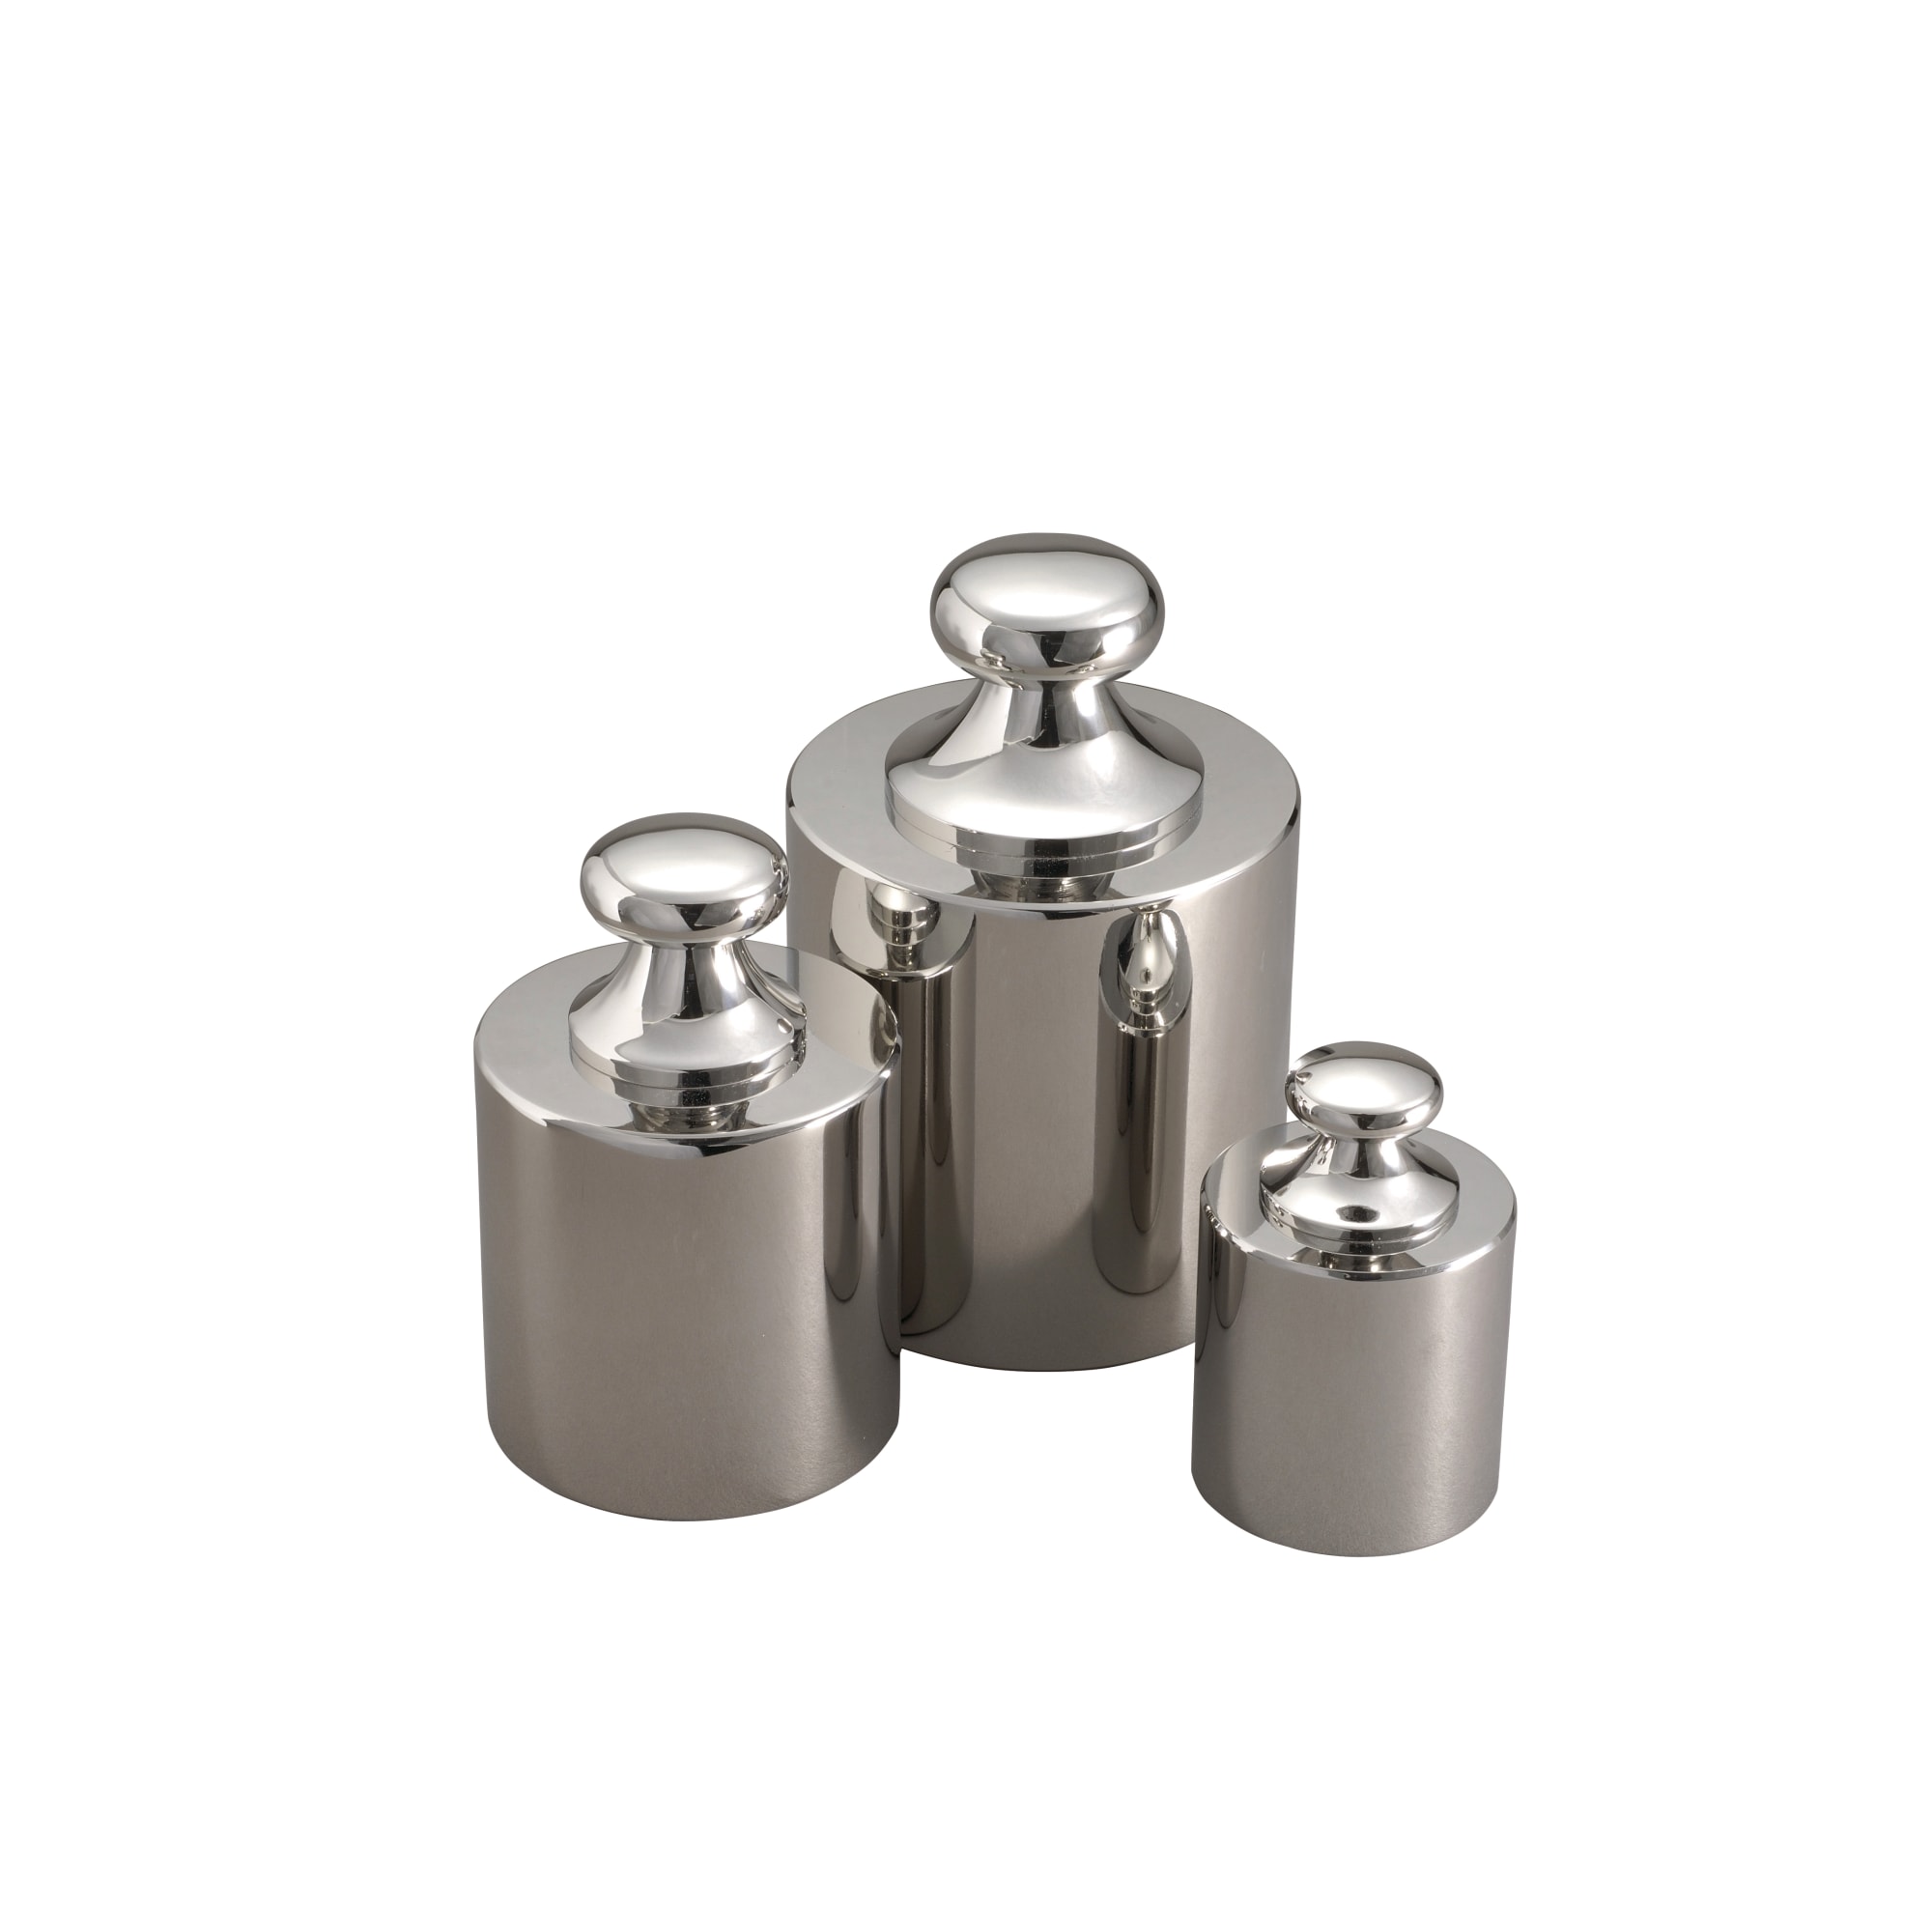 50g Stainless Steel Cylindrical Calibration Weight 